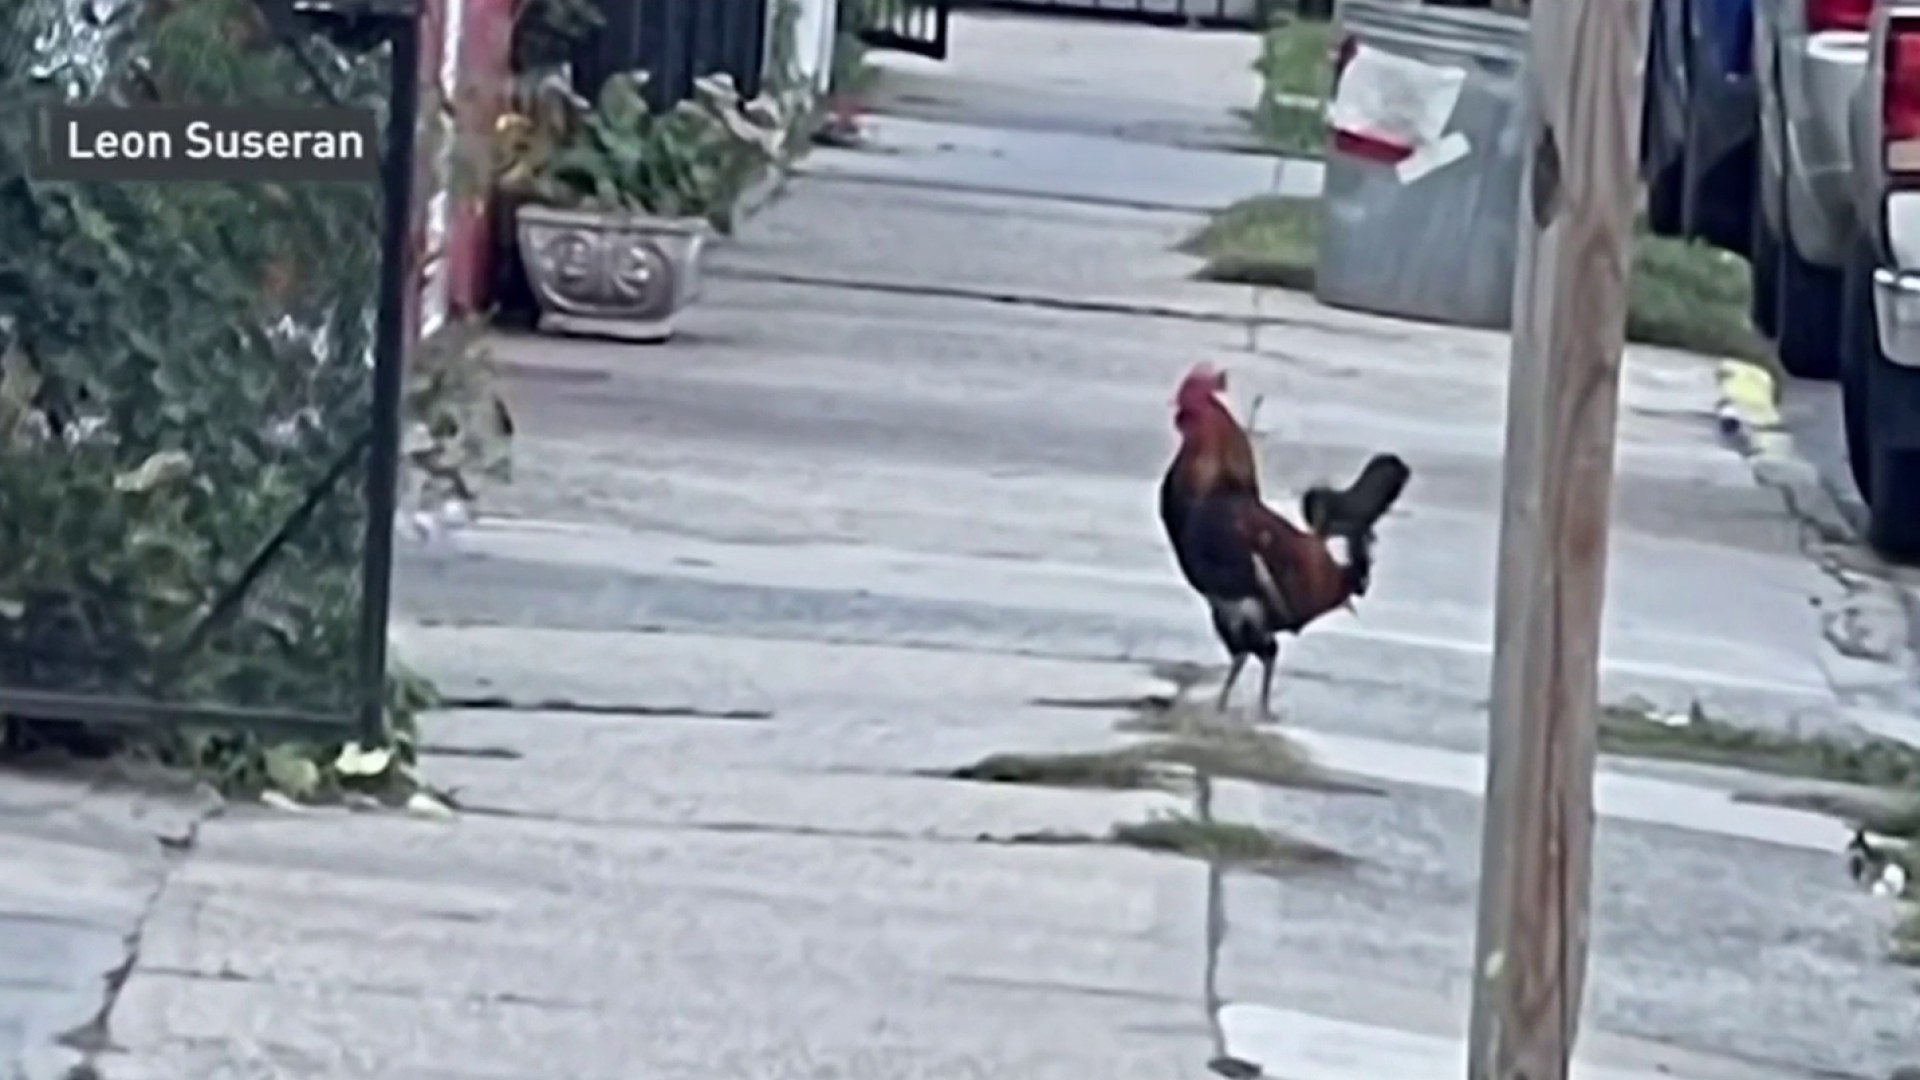 Man Walking on NYC Street Attacked by Rooster That Has Terrorized
Neighbors for Years